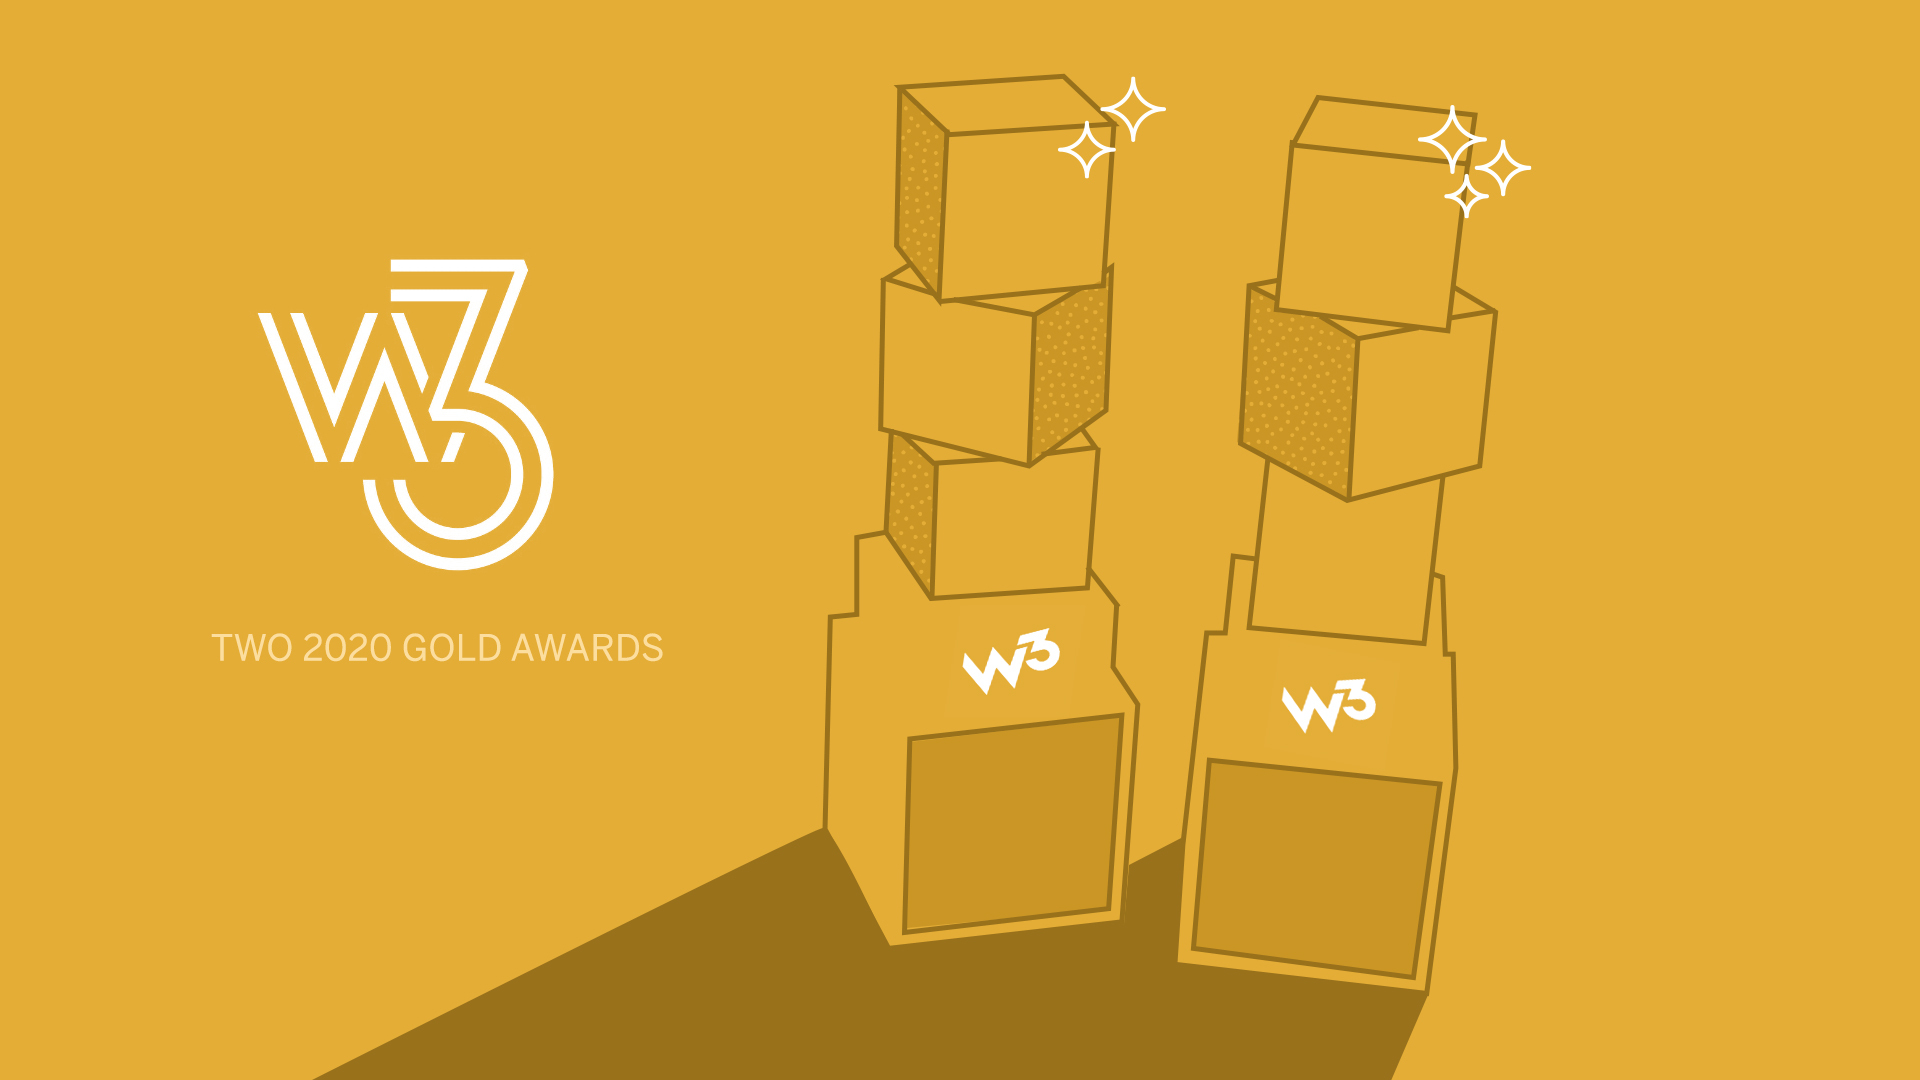 Illustration of two Gold w3 Awards